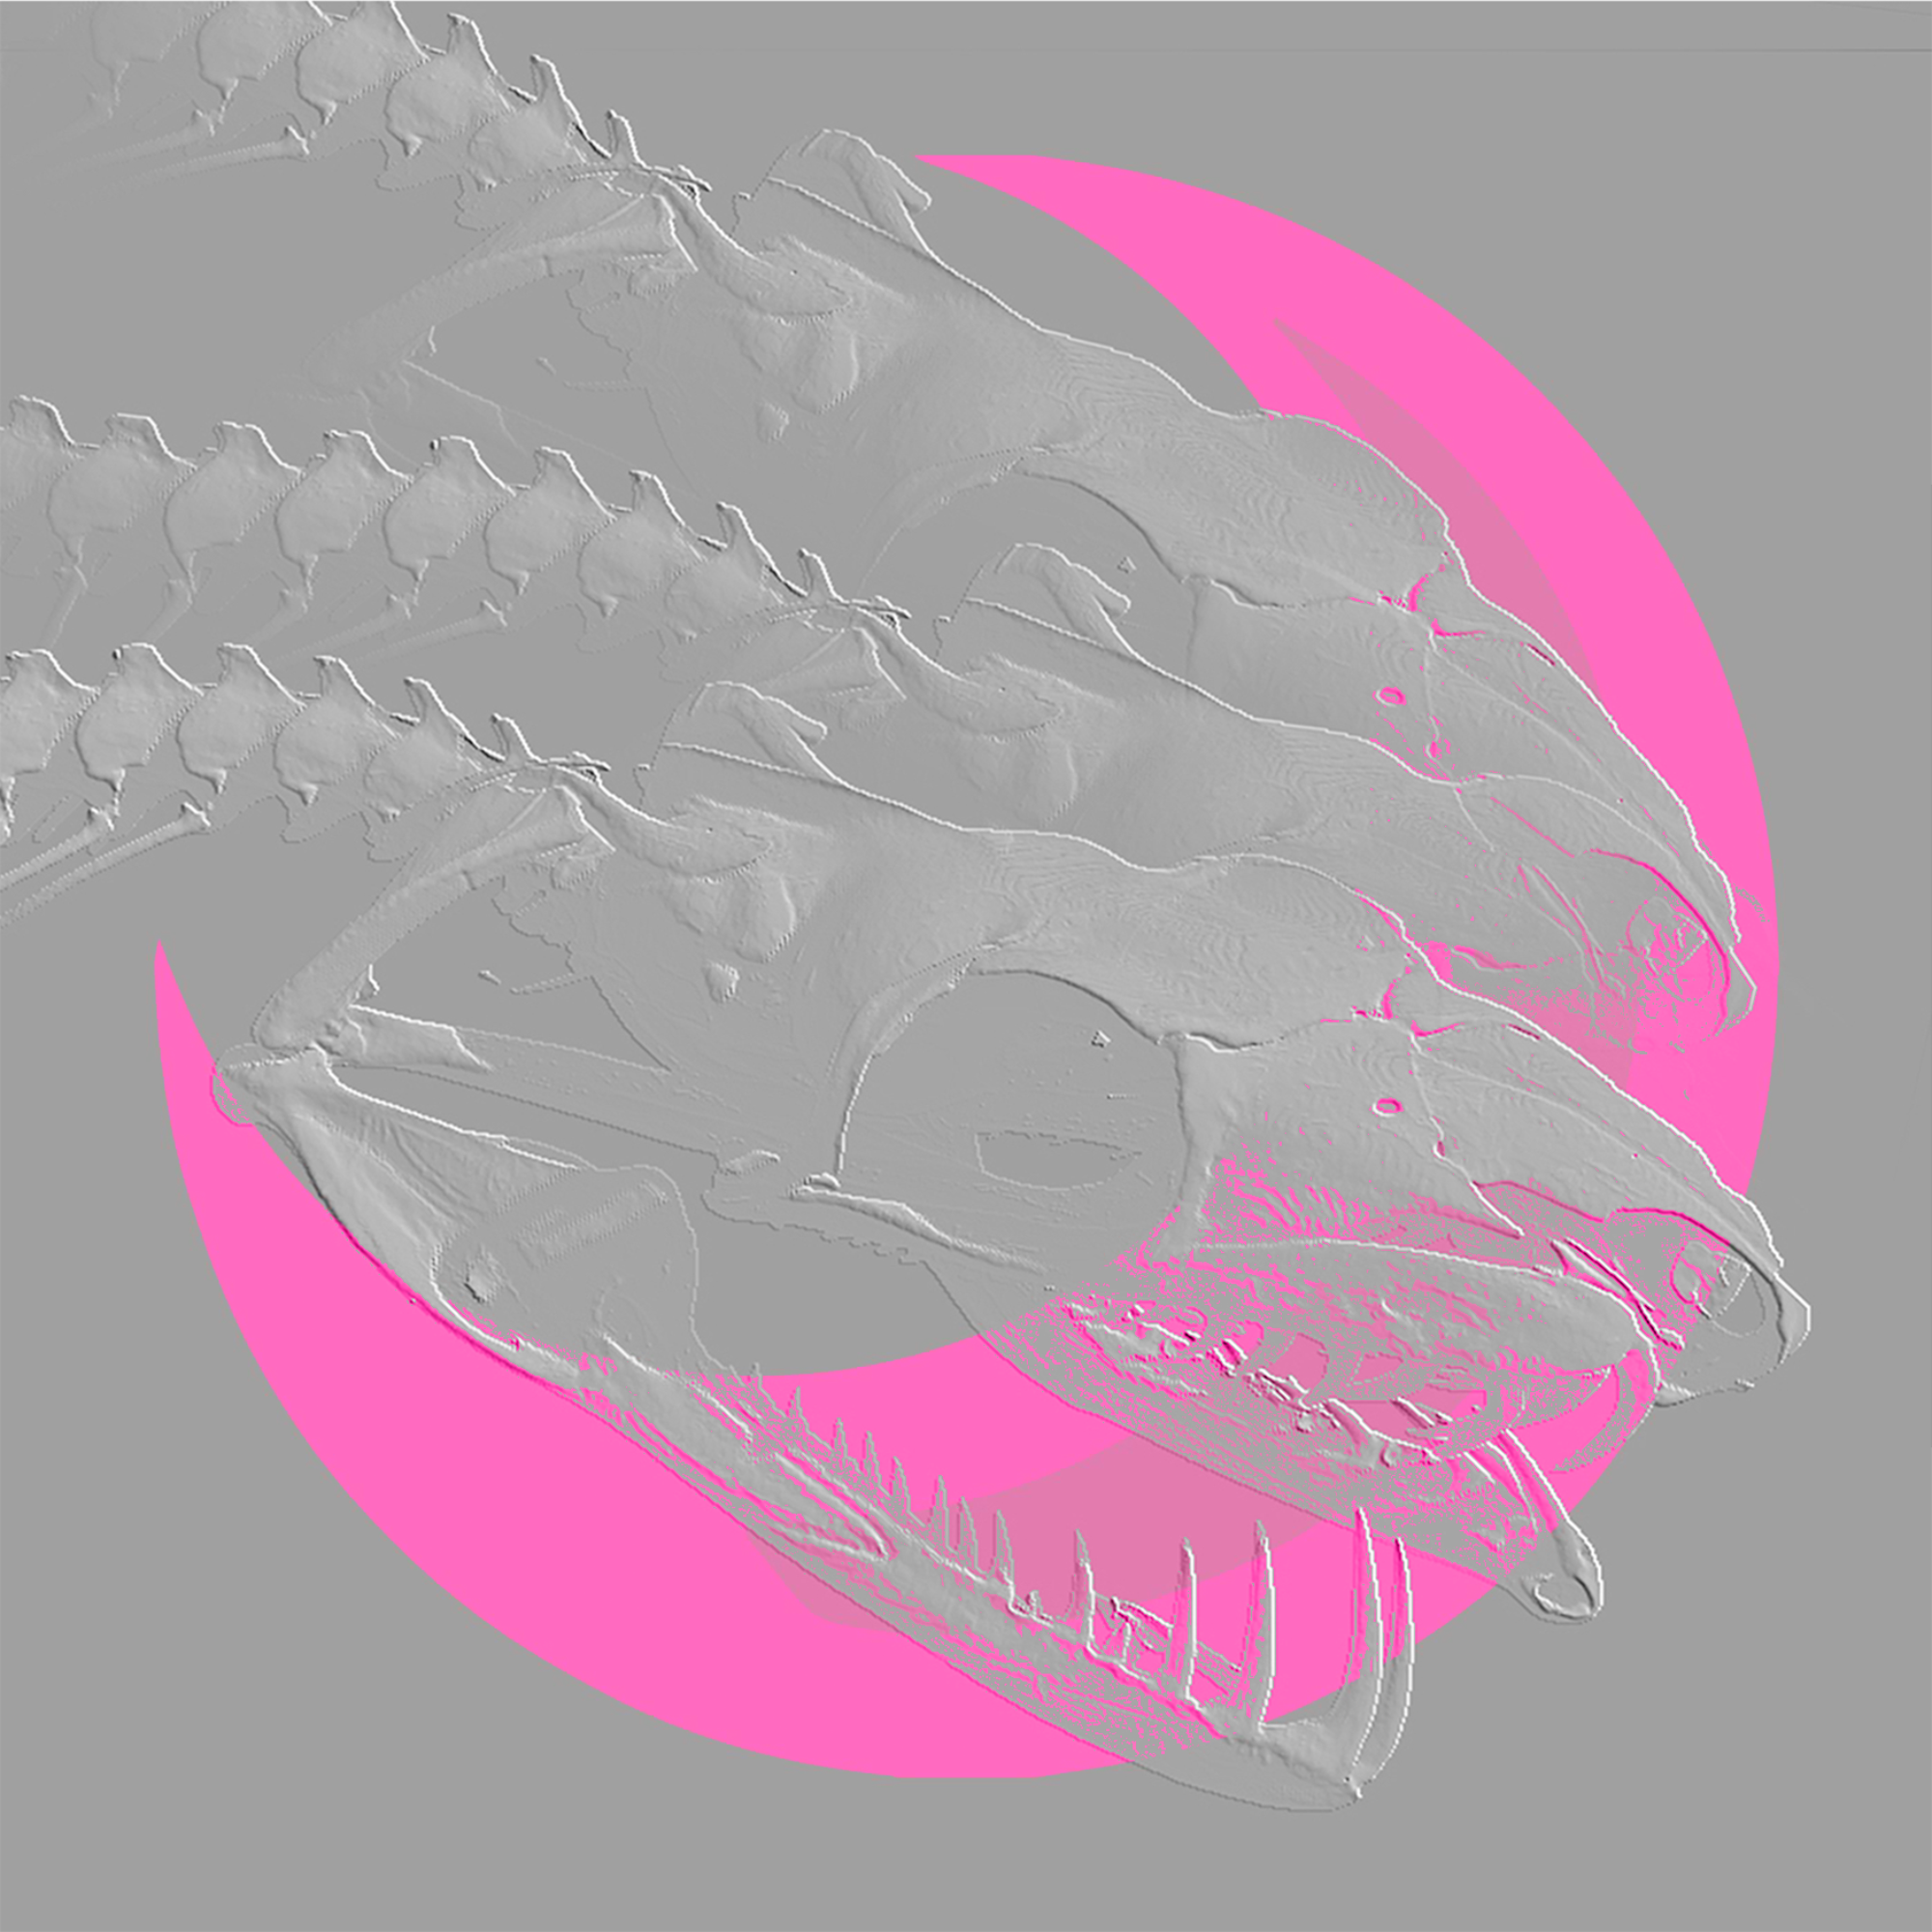 Three snake-like skeletons intersect with a pink crescent moon.